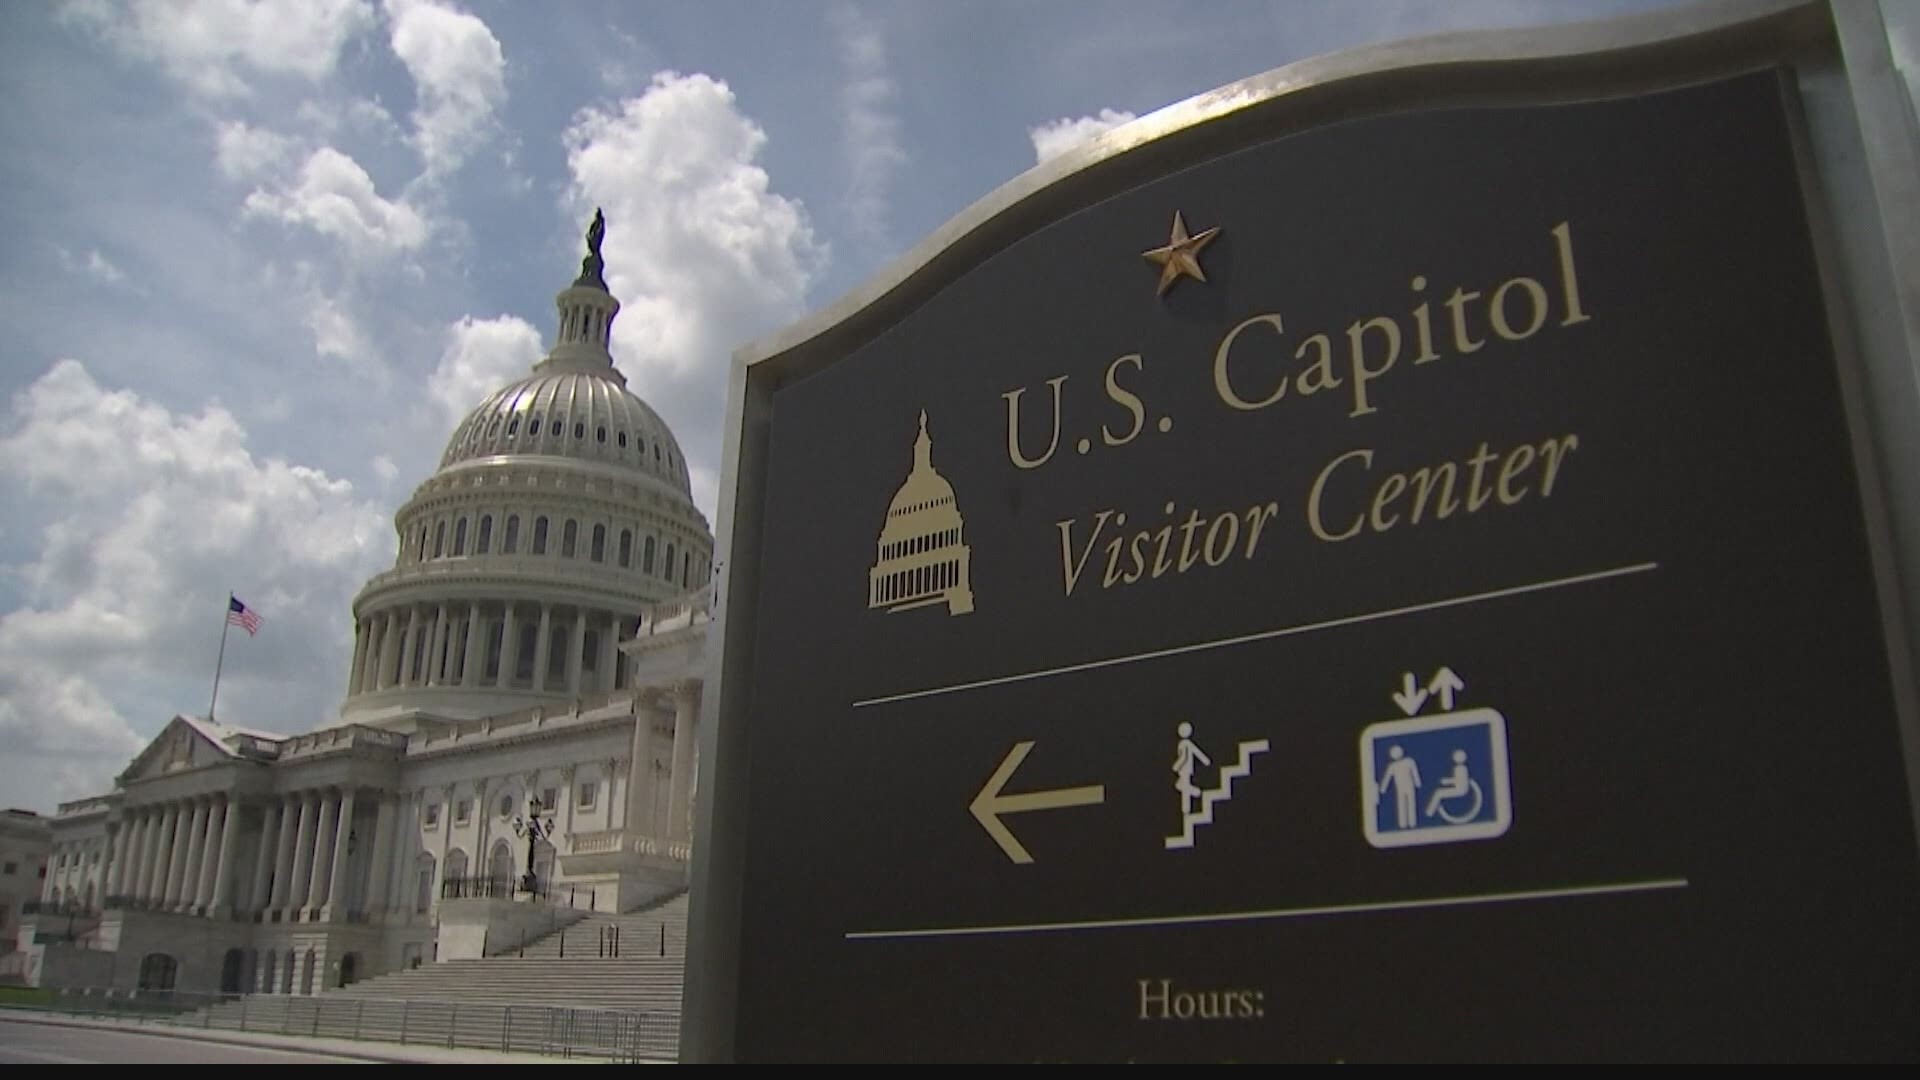 Representative Andre Carson said there were many security failures last week at the Capitol.